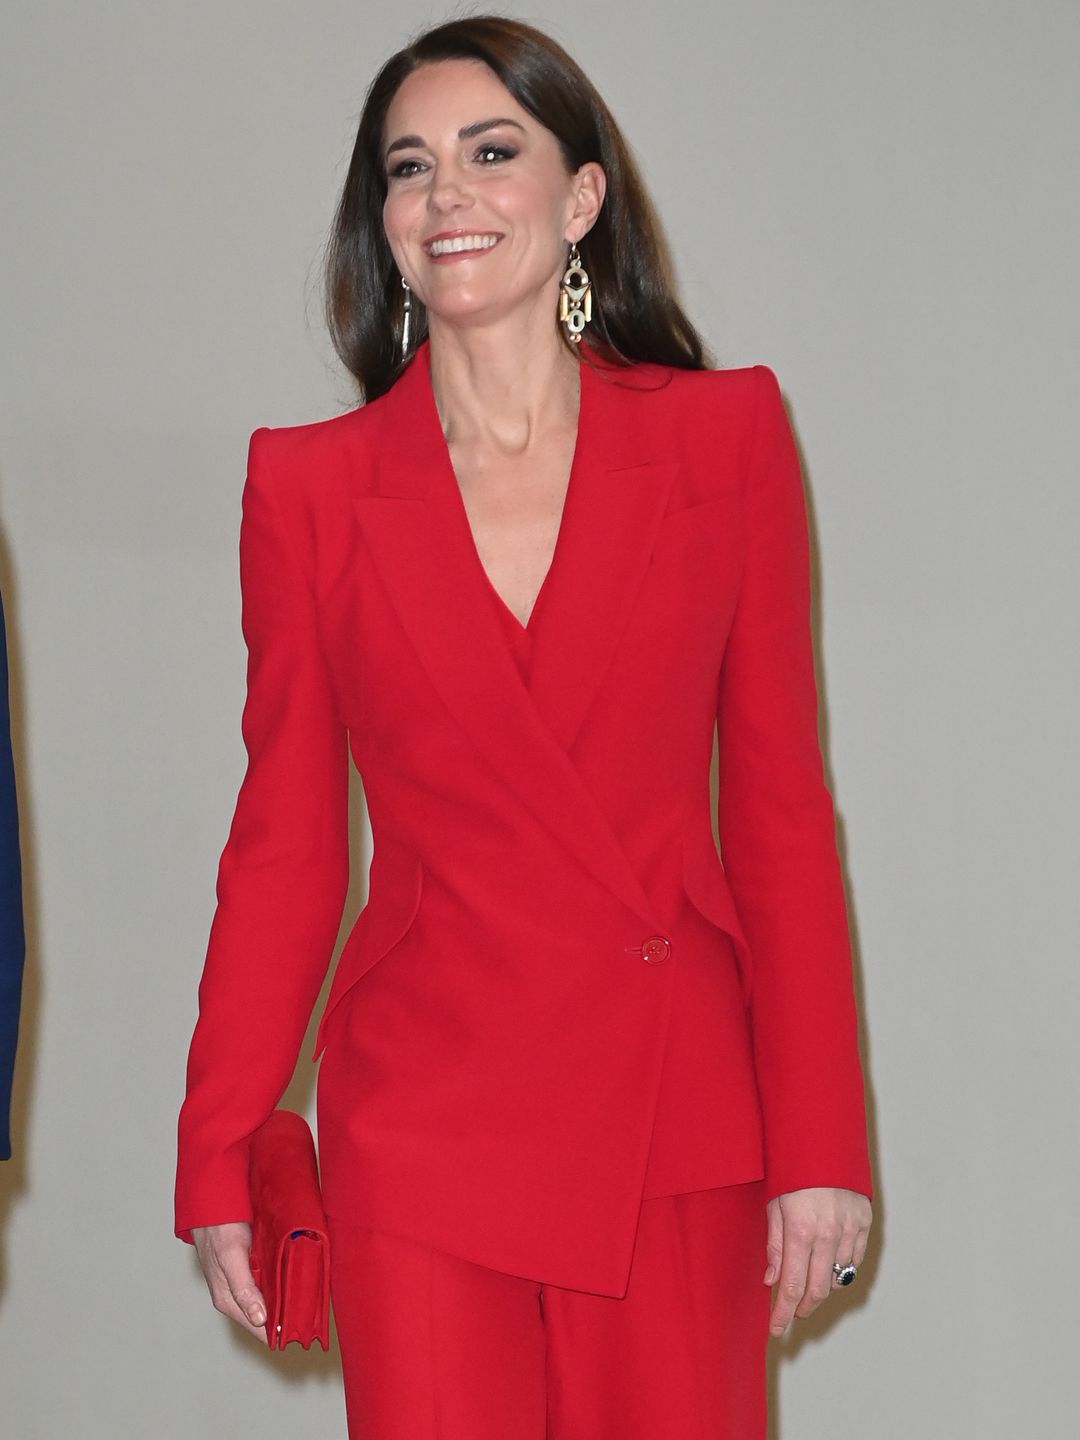 Catherine, Princess of Wales attends a pre-campaign launch event, hosted by The Royal Foundation Centre for Early Childhood in Alexander McQueen suit